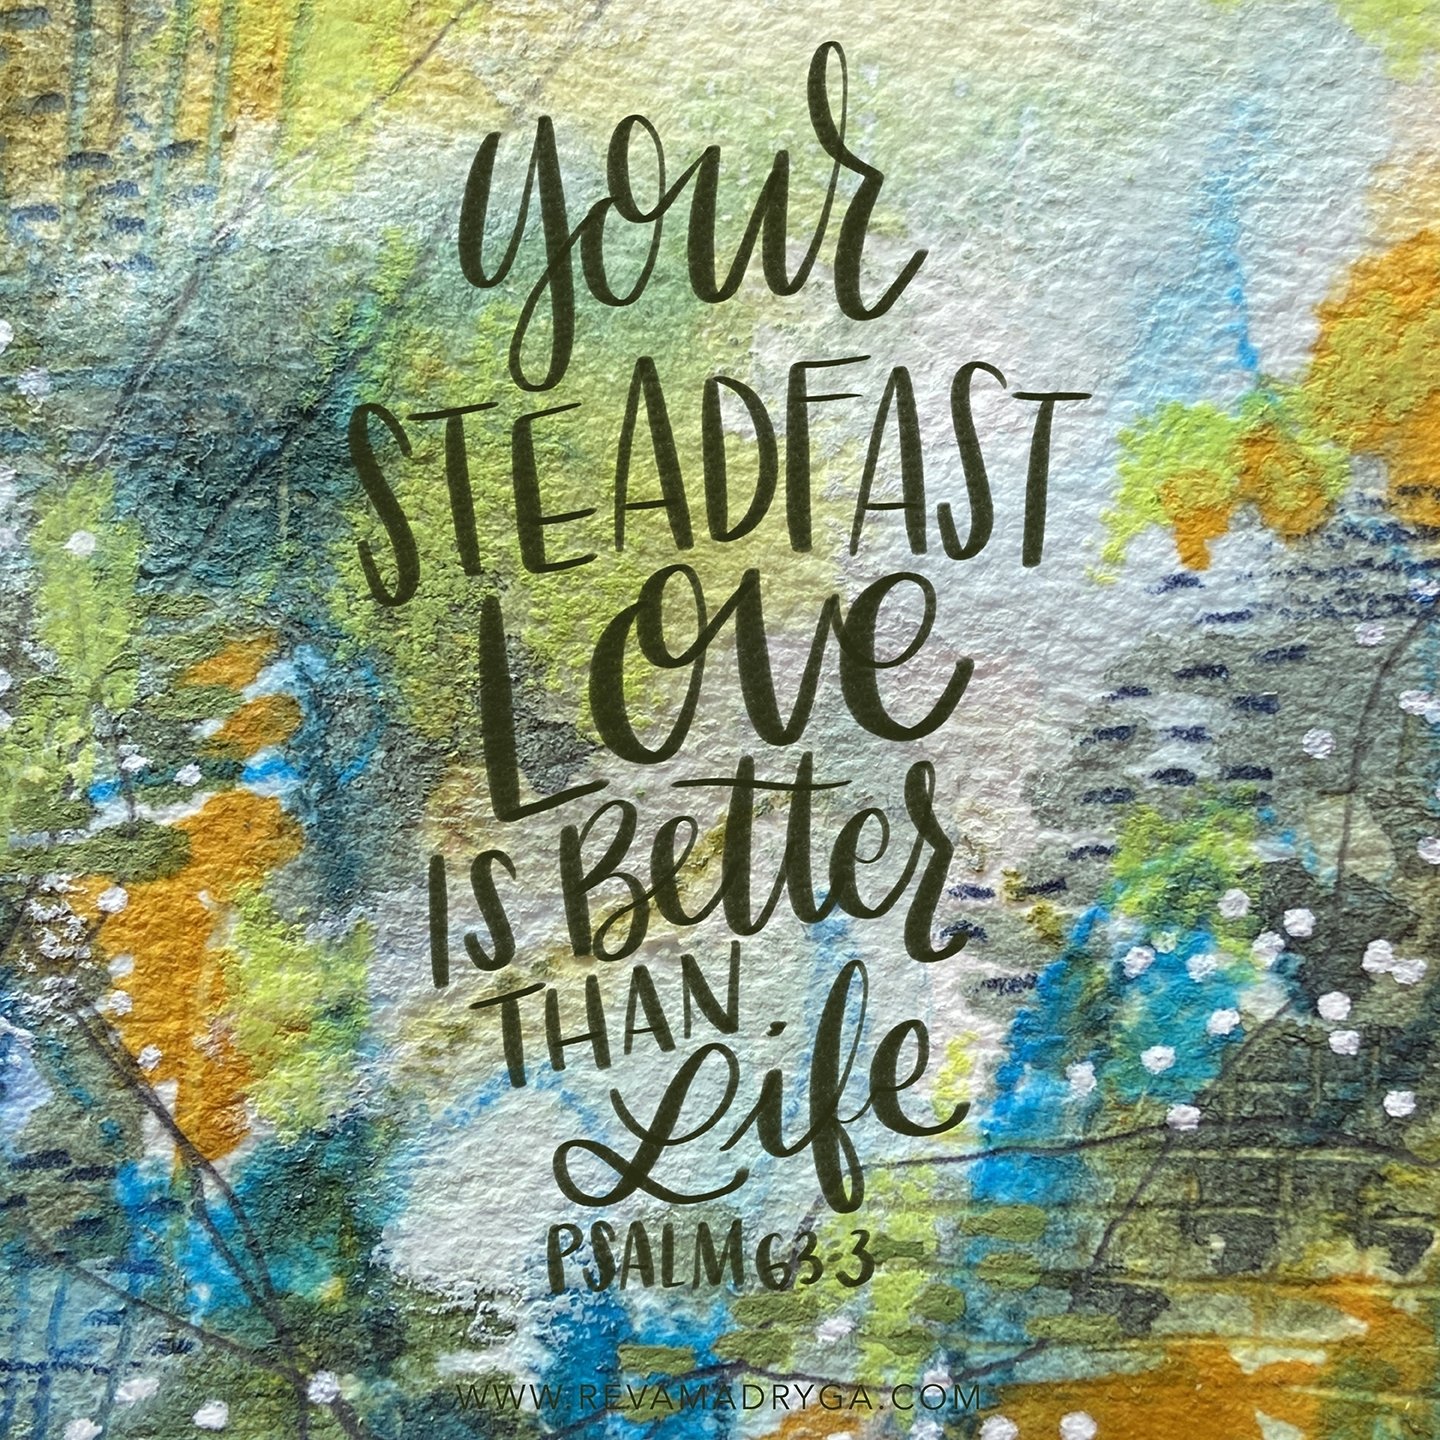 Because your steadfast love is better than life,
my lips will praise you.

Psalm 63:3